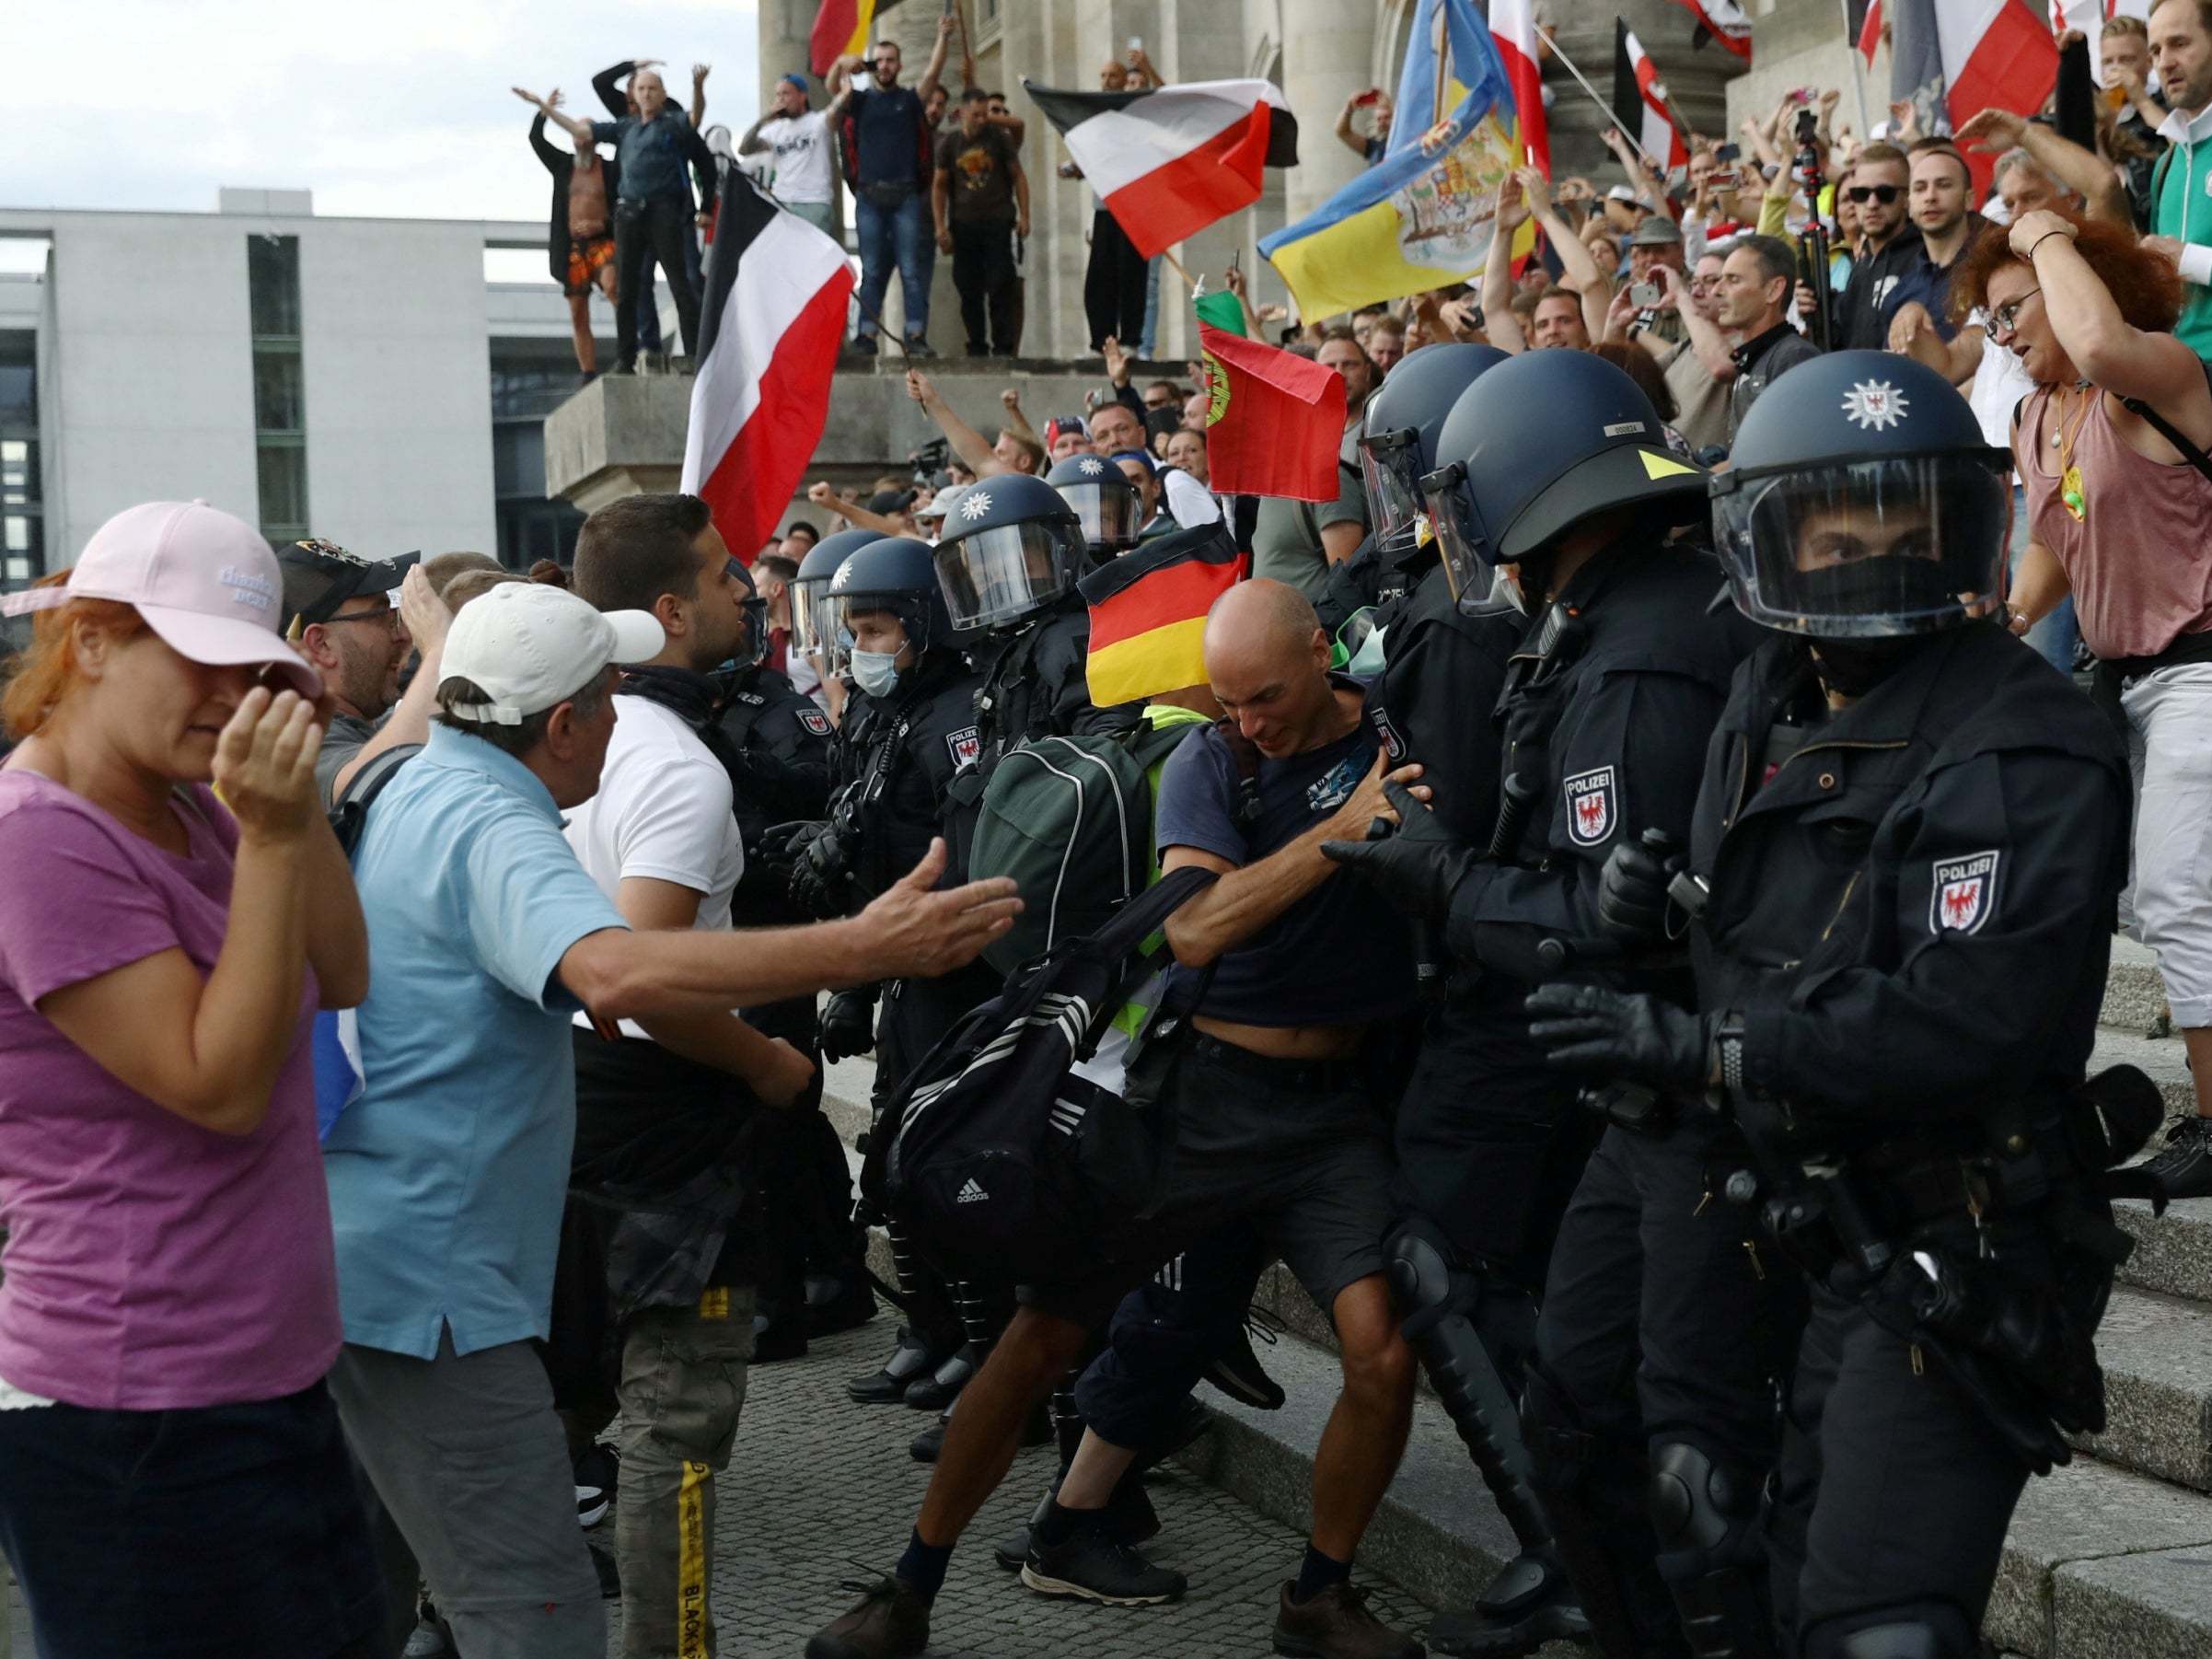 Police scuffle with protesters in front of the Reichstag building in Berlin, Germany.